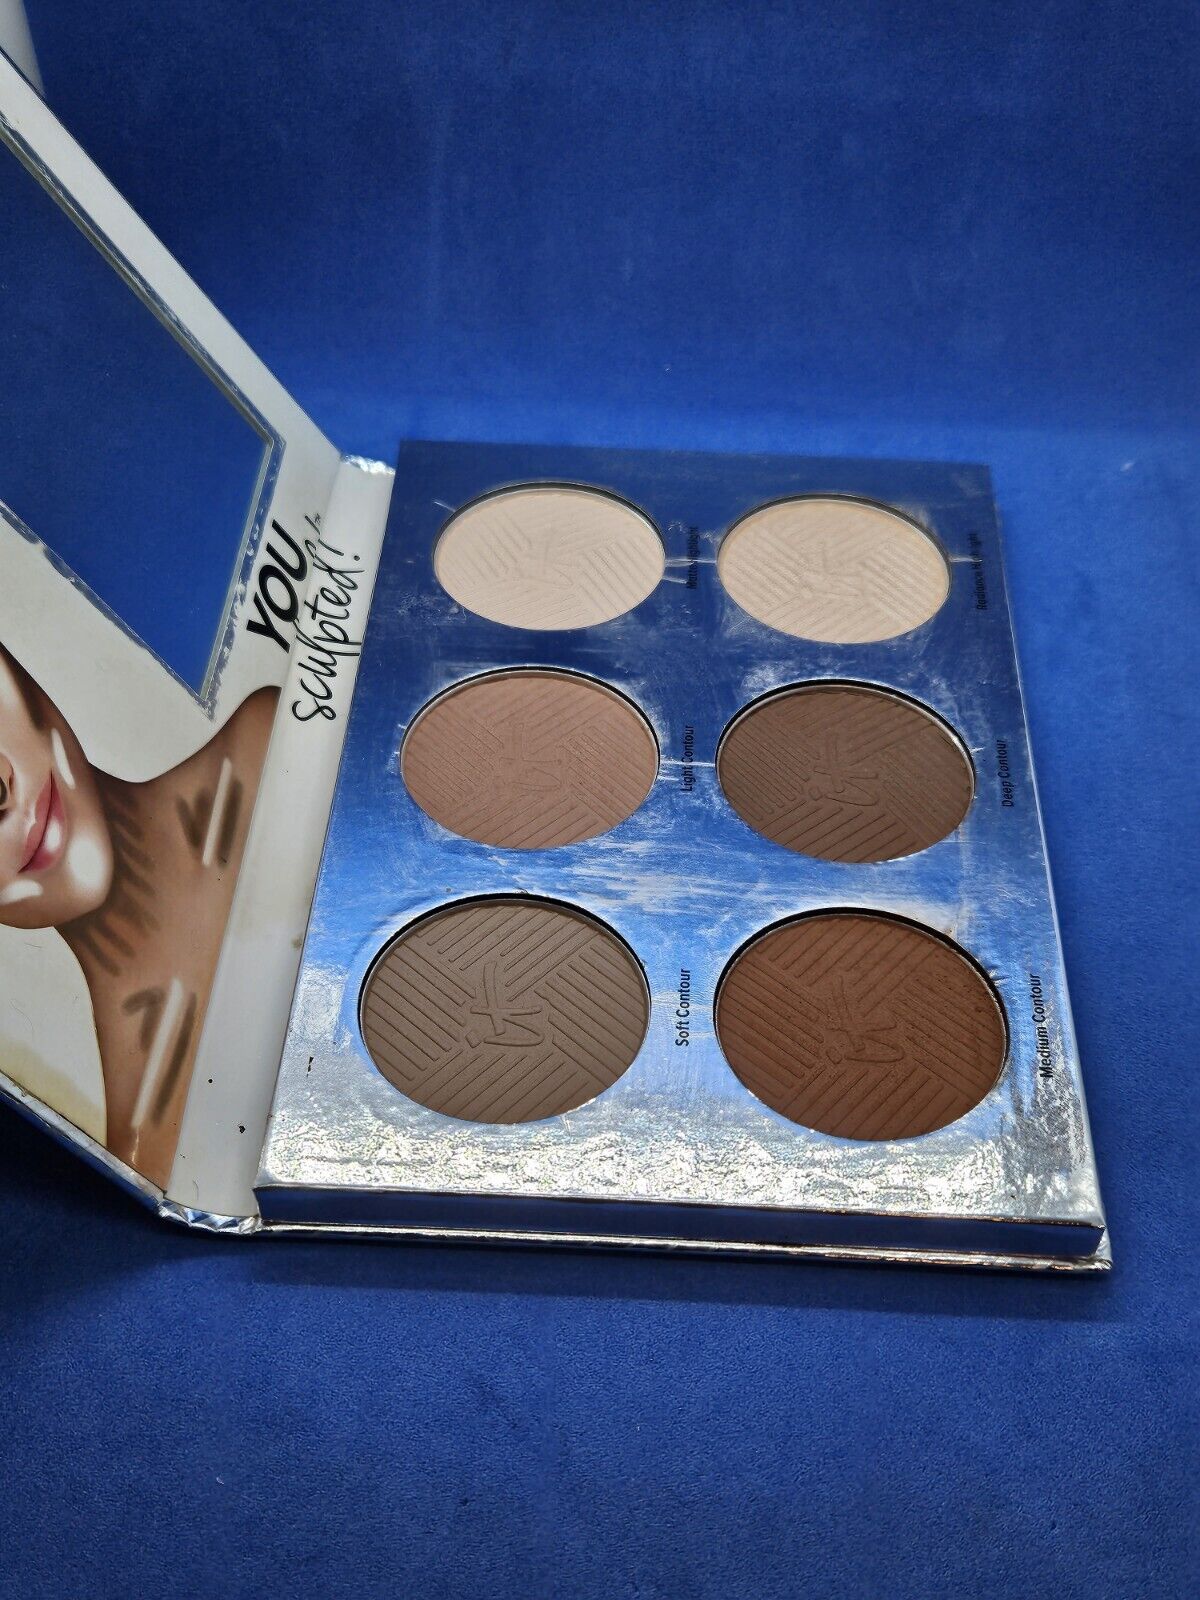 It Cosmetics You Sculpted! Universal Contouring Palette For Face &Amp; Body (Damage)